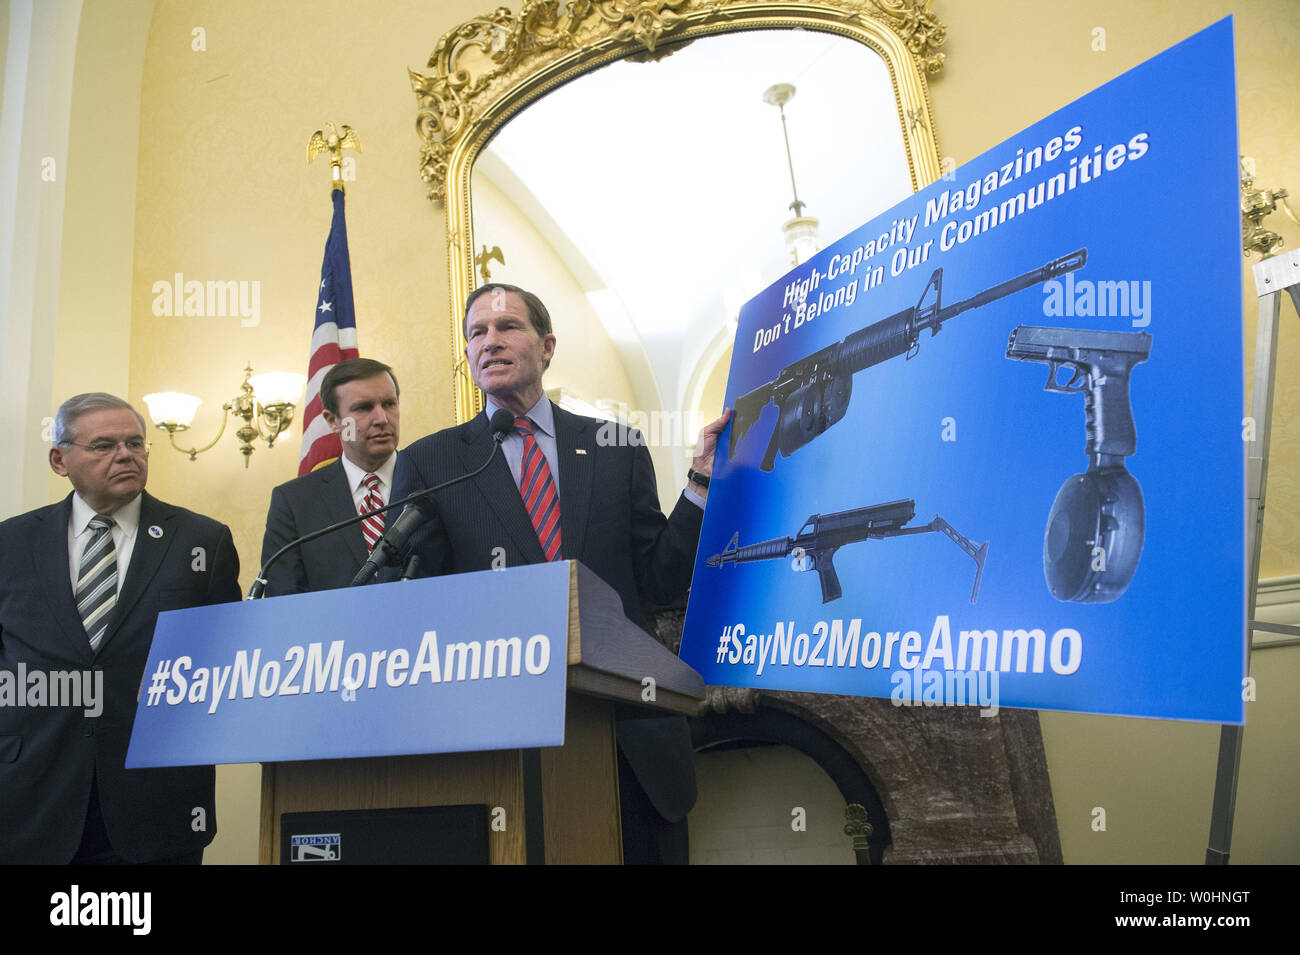 Sen. Richard Blumenthal (D-CN) speaks at a news conference to call attention to new gun violence prevention efforts and to unveil legislation that would limit 'high-capacity magazines, feeding devices of more than 10 rounds of ammunition that are designed for shooting,' on Capitol Hill in Washington, D.C. on February 5, 2015.  Photo by Kevin Dietsch/UPI. Stock Photo